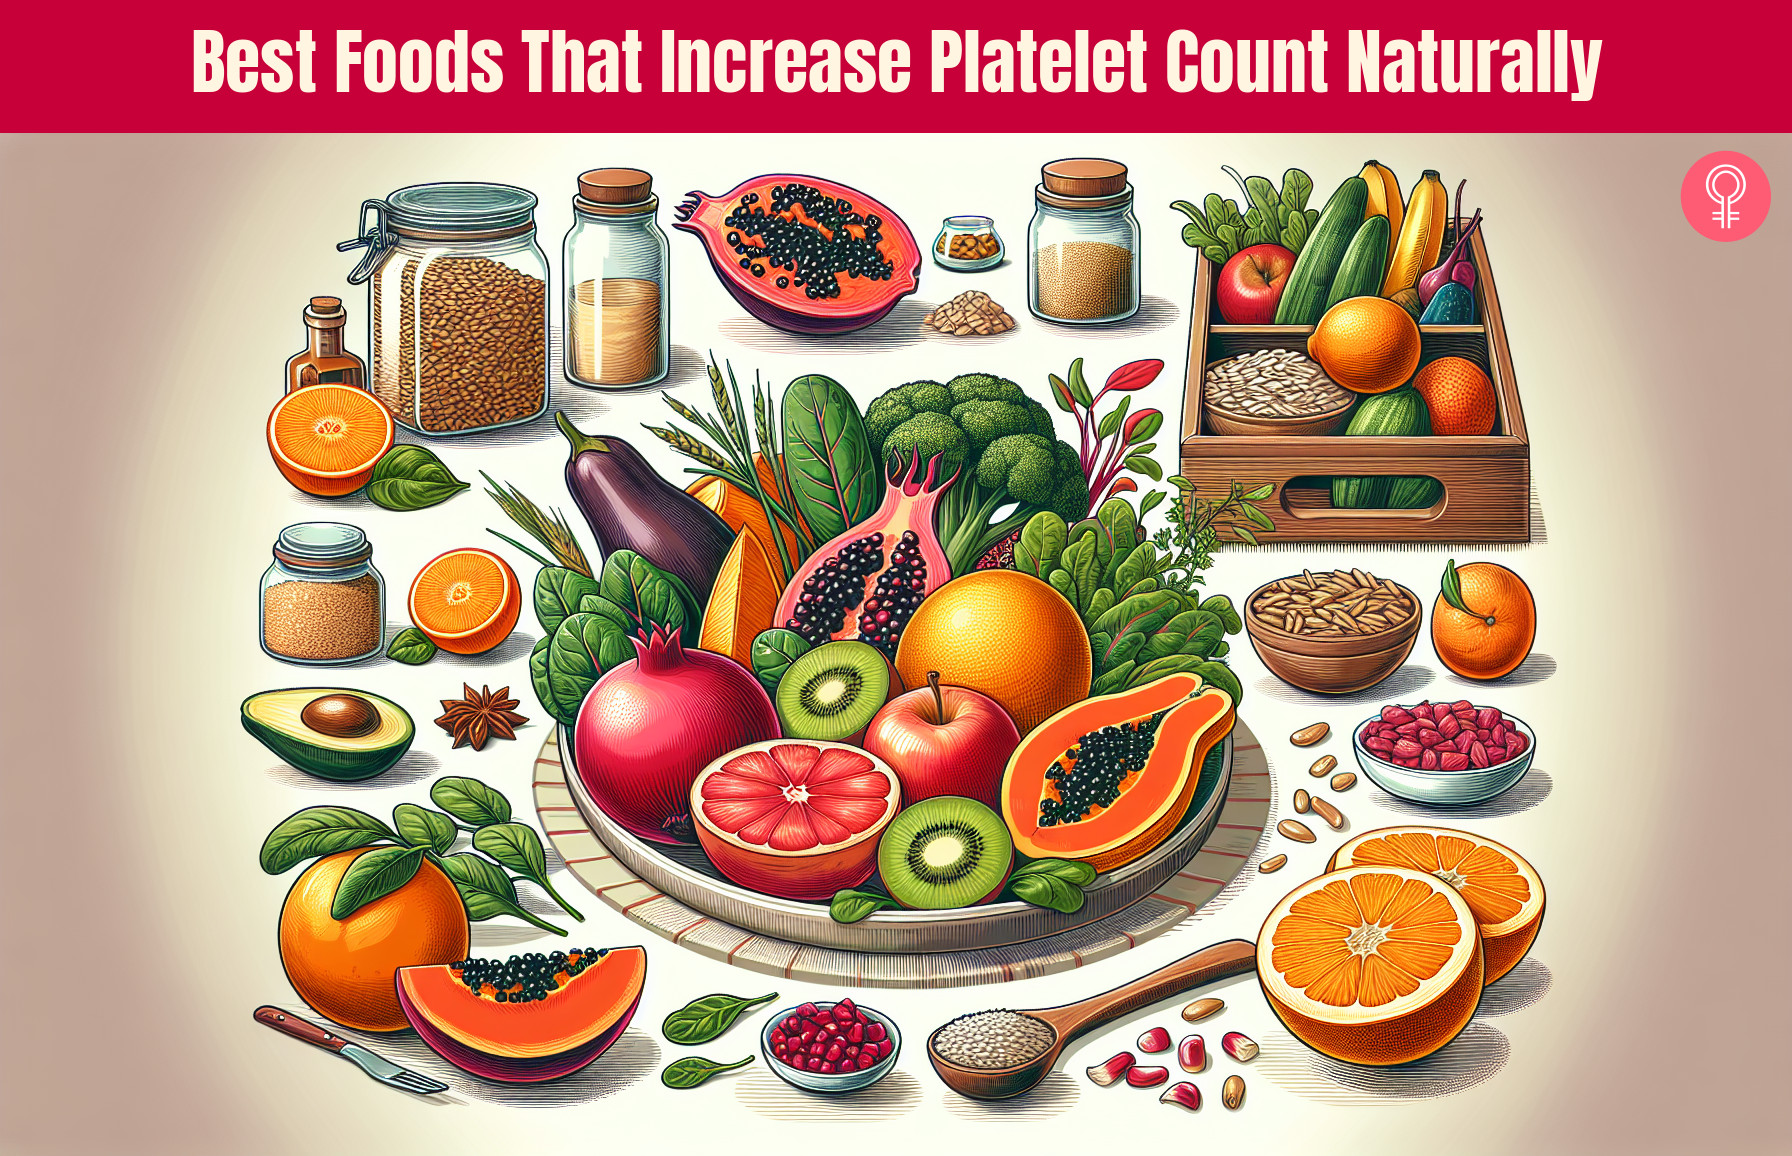 foods that increase platelet count naturally_illustration